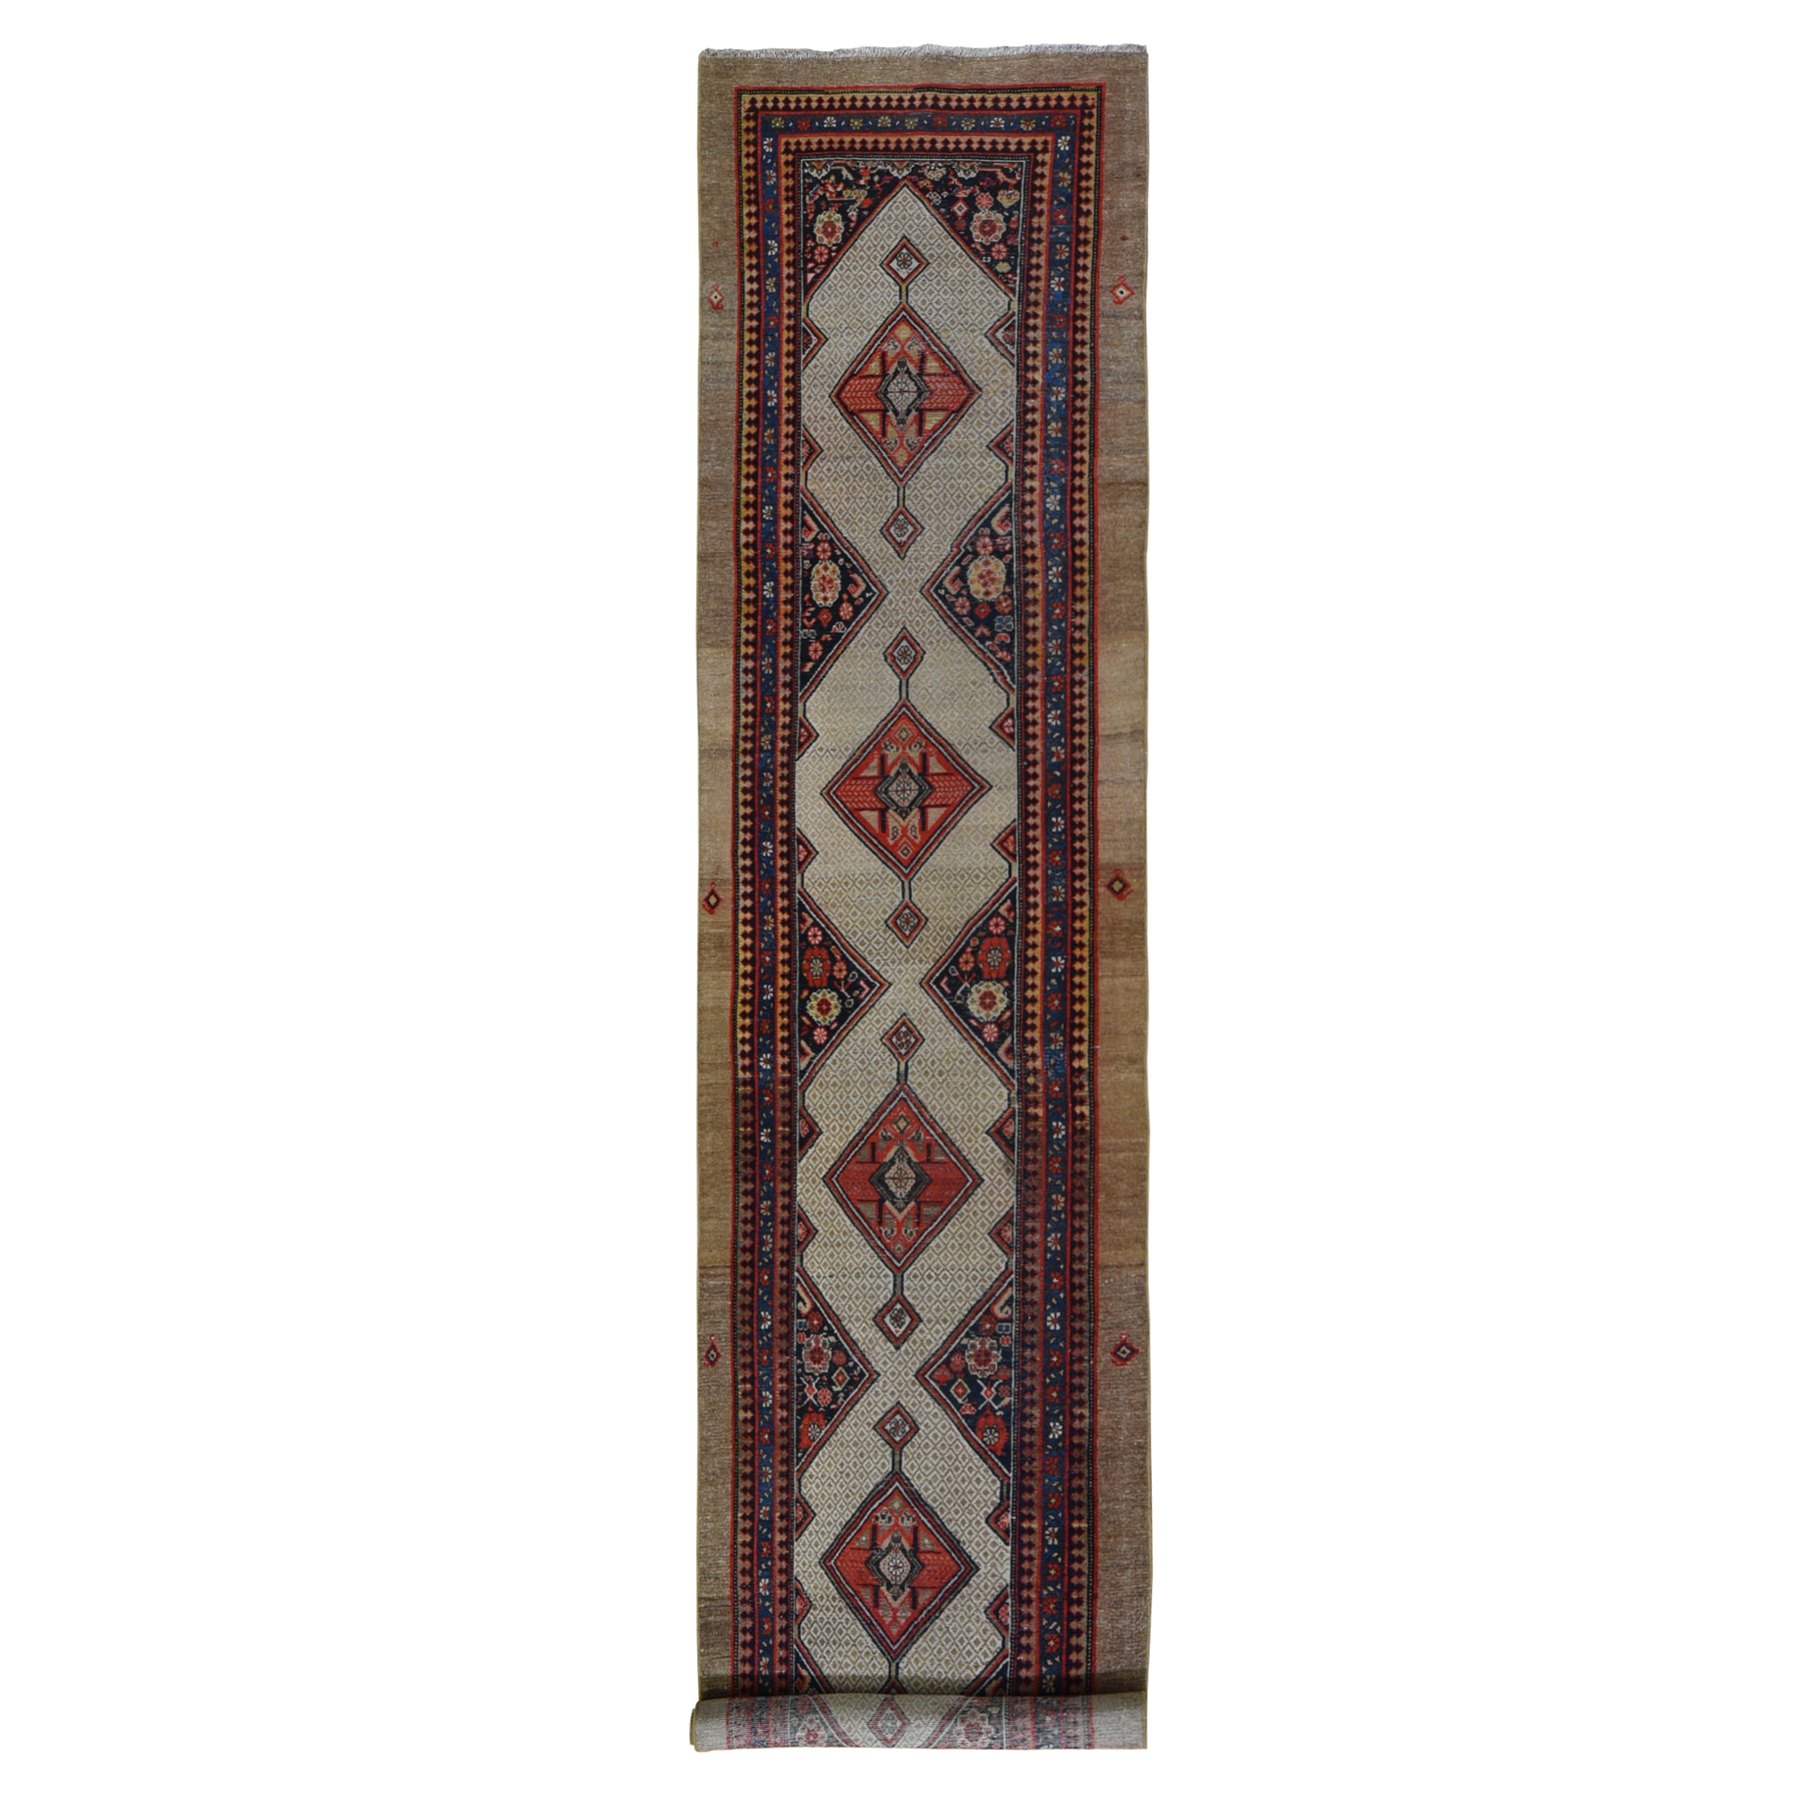 Antique-Hand-Knotted-Rug-297555